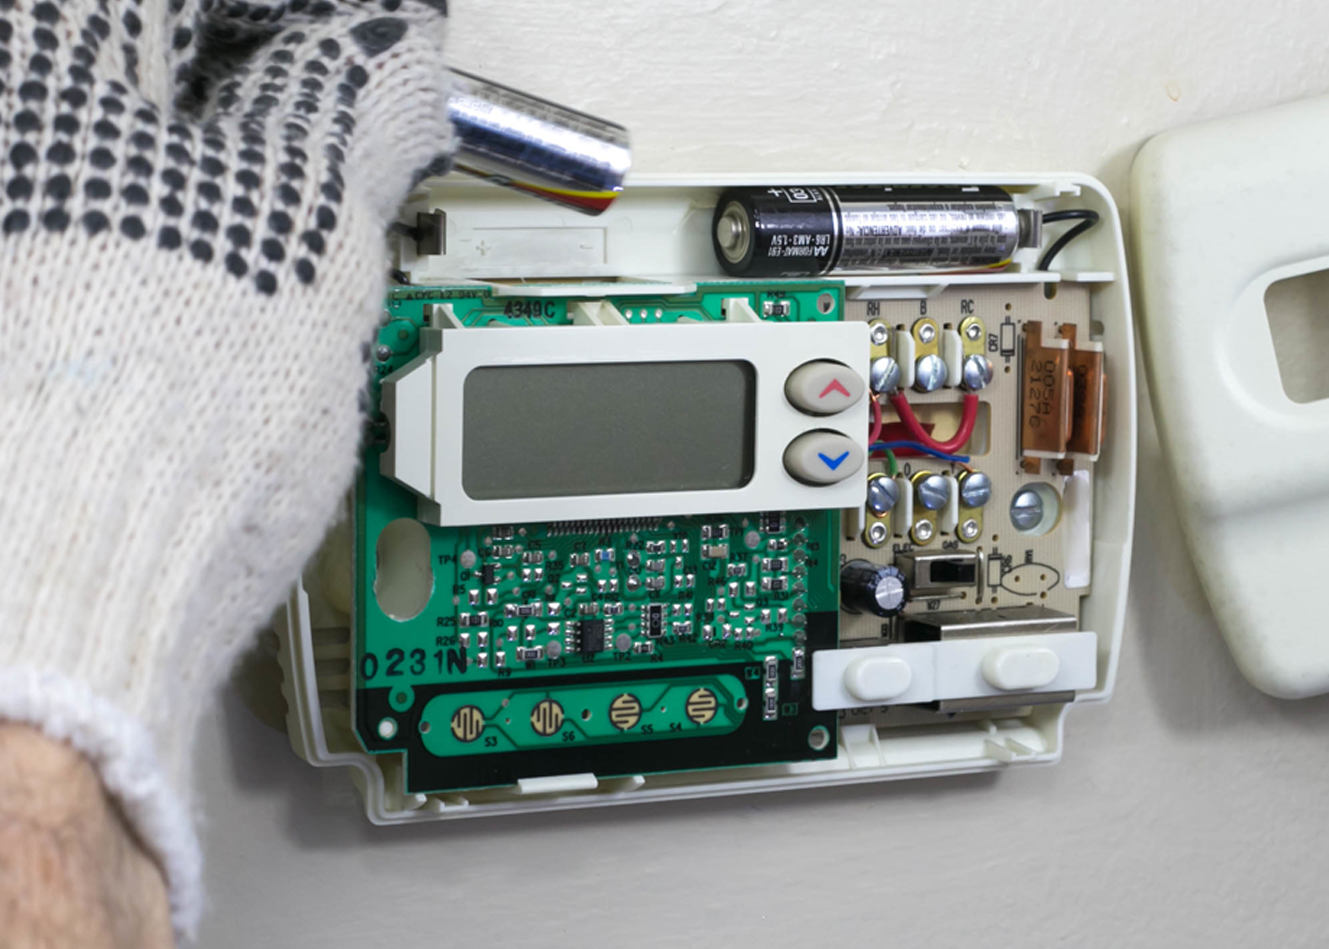 Changing Batteries in Your Thermostats Just Got Easier